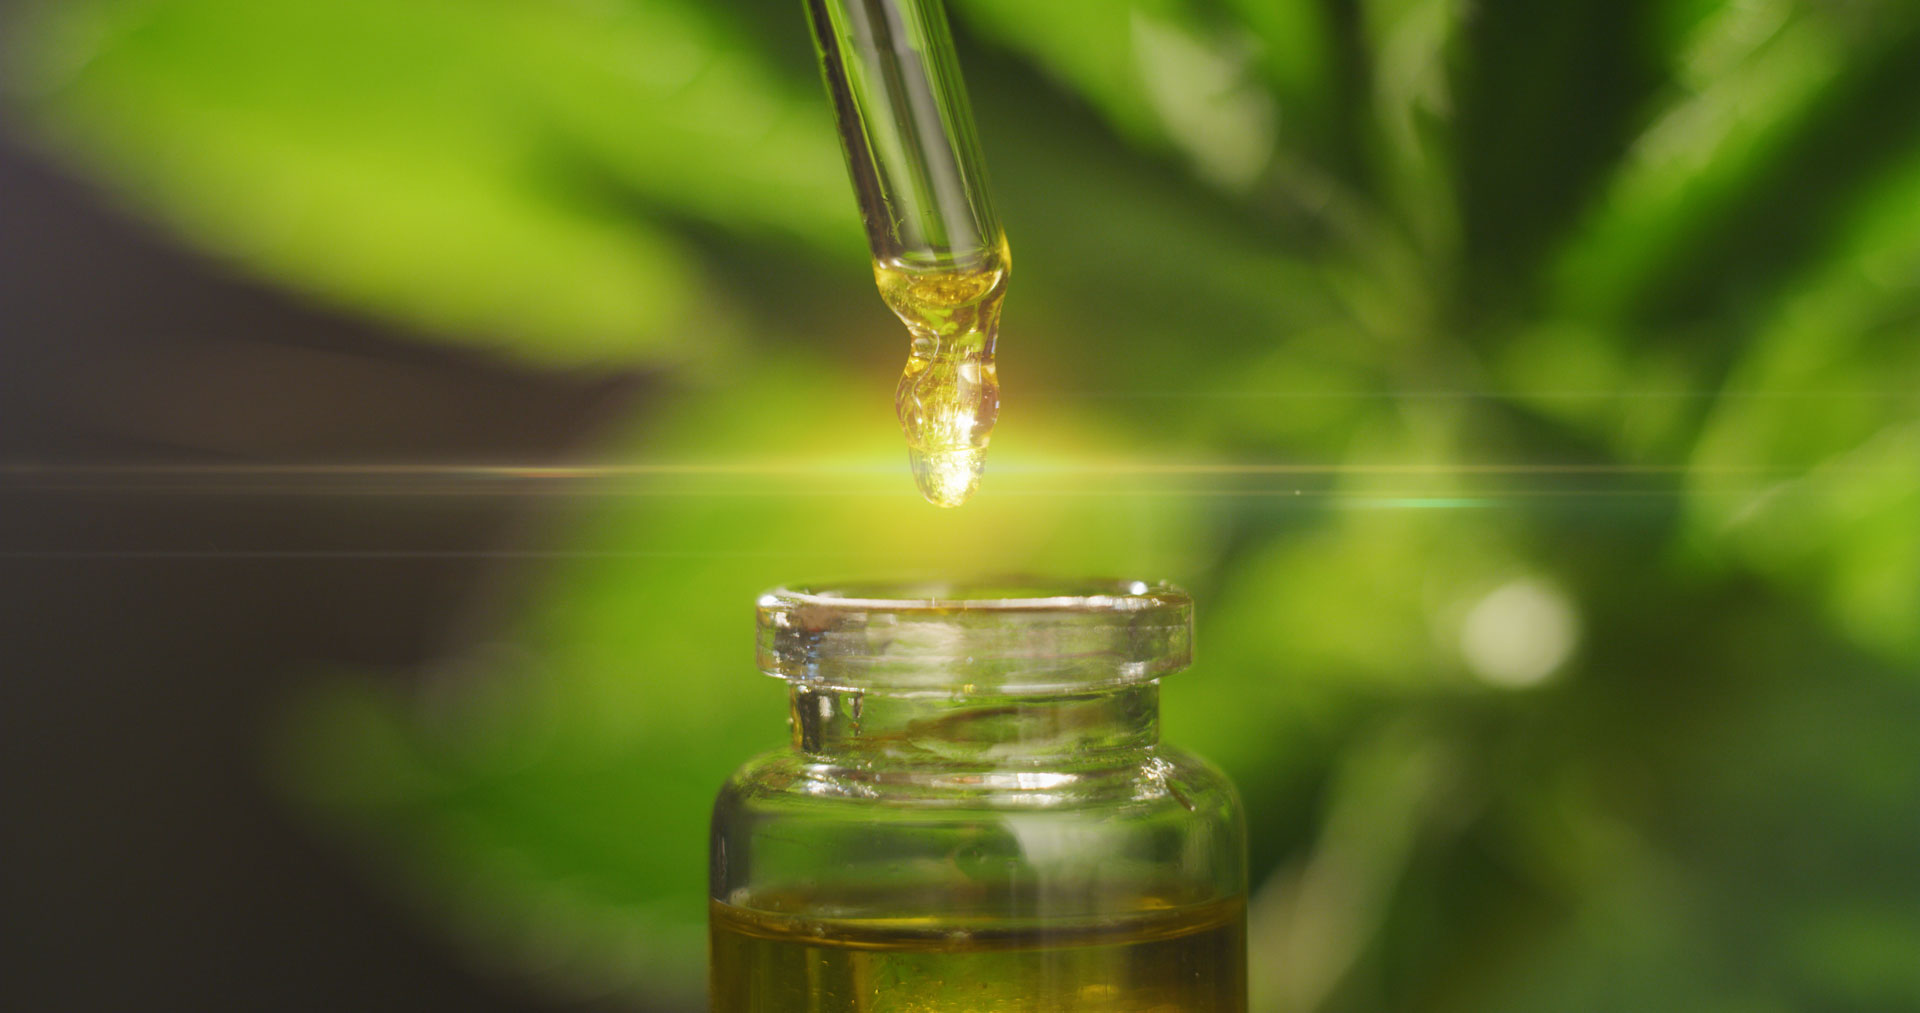 eyedropper with golden oil dripping into a clear bottle against a background of cannabis plants